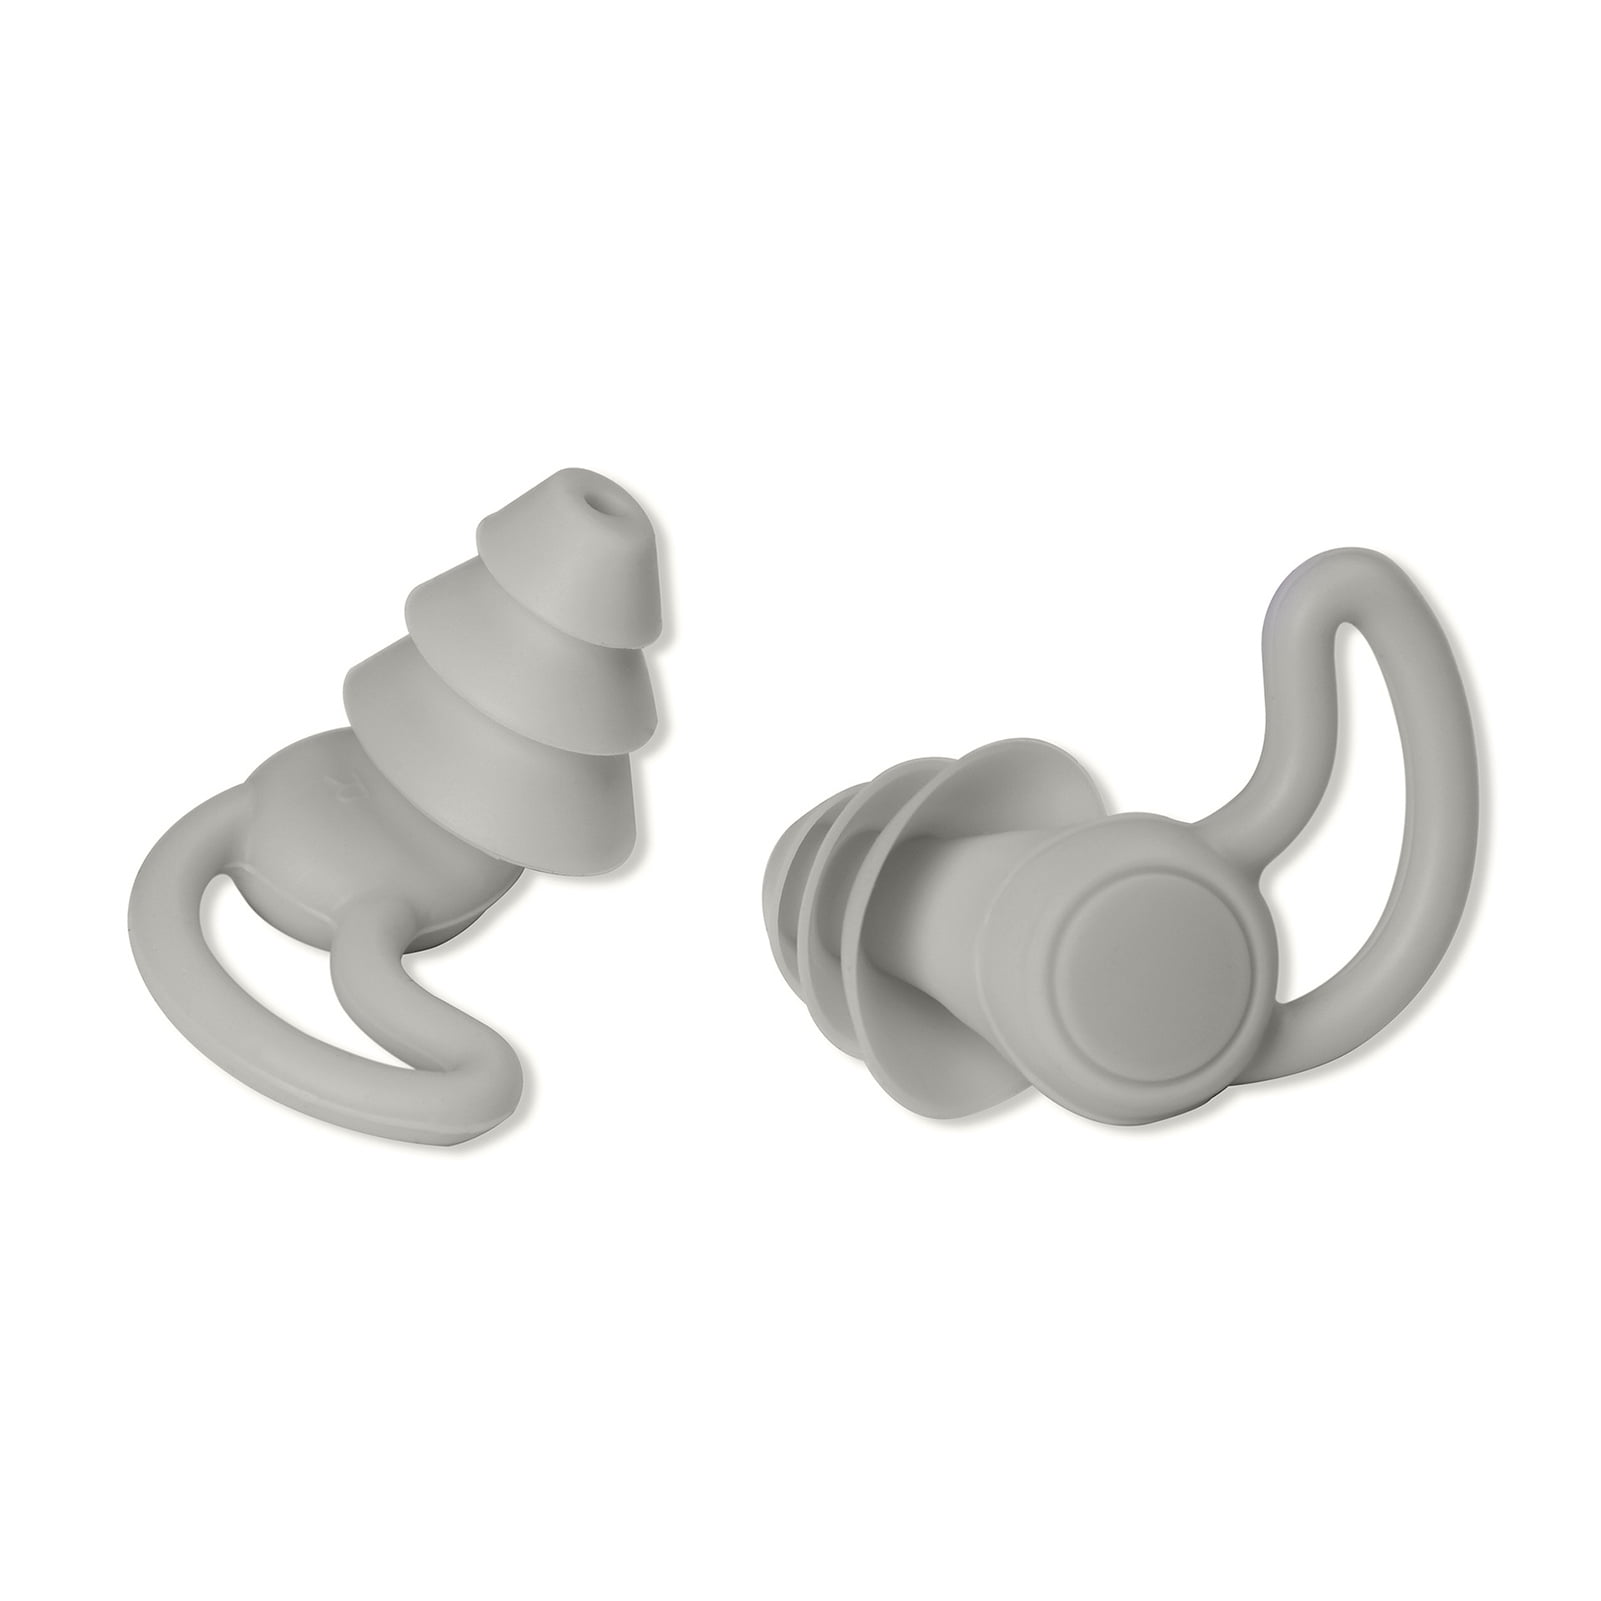 Loop Experience Equinox Earplugs – High-Fidelity Reusable Earplugs |  Colourful Hearing Protection | for Music & Events, Focus & Noise  Sensitivity 